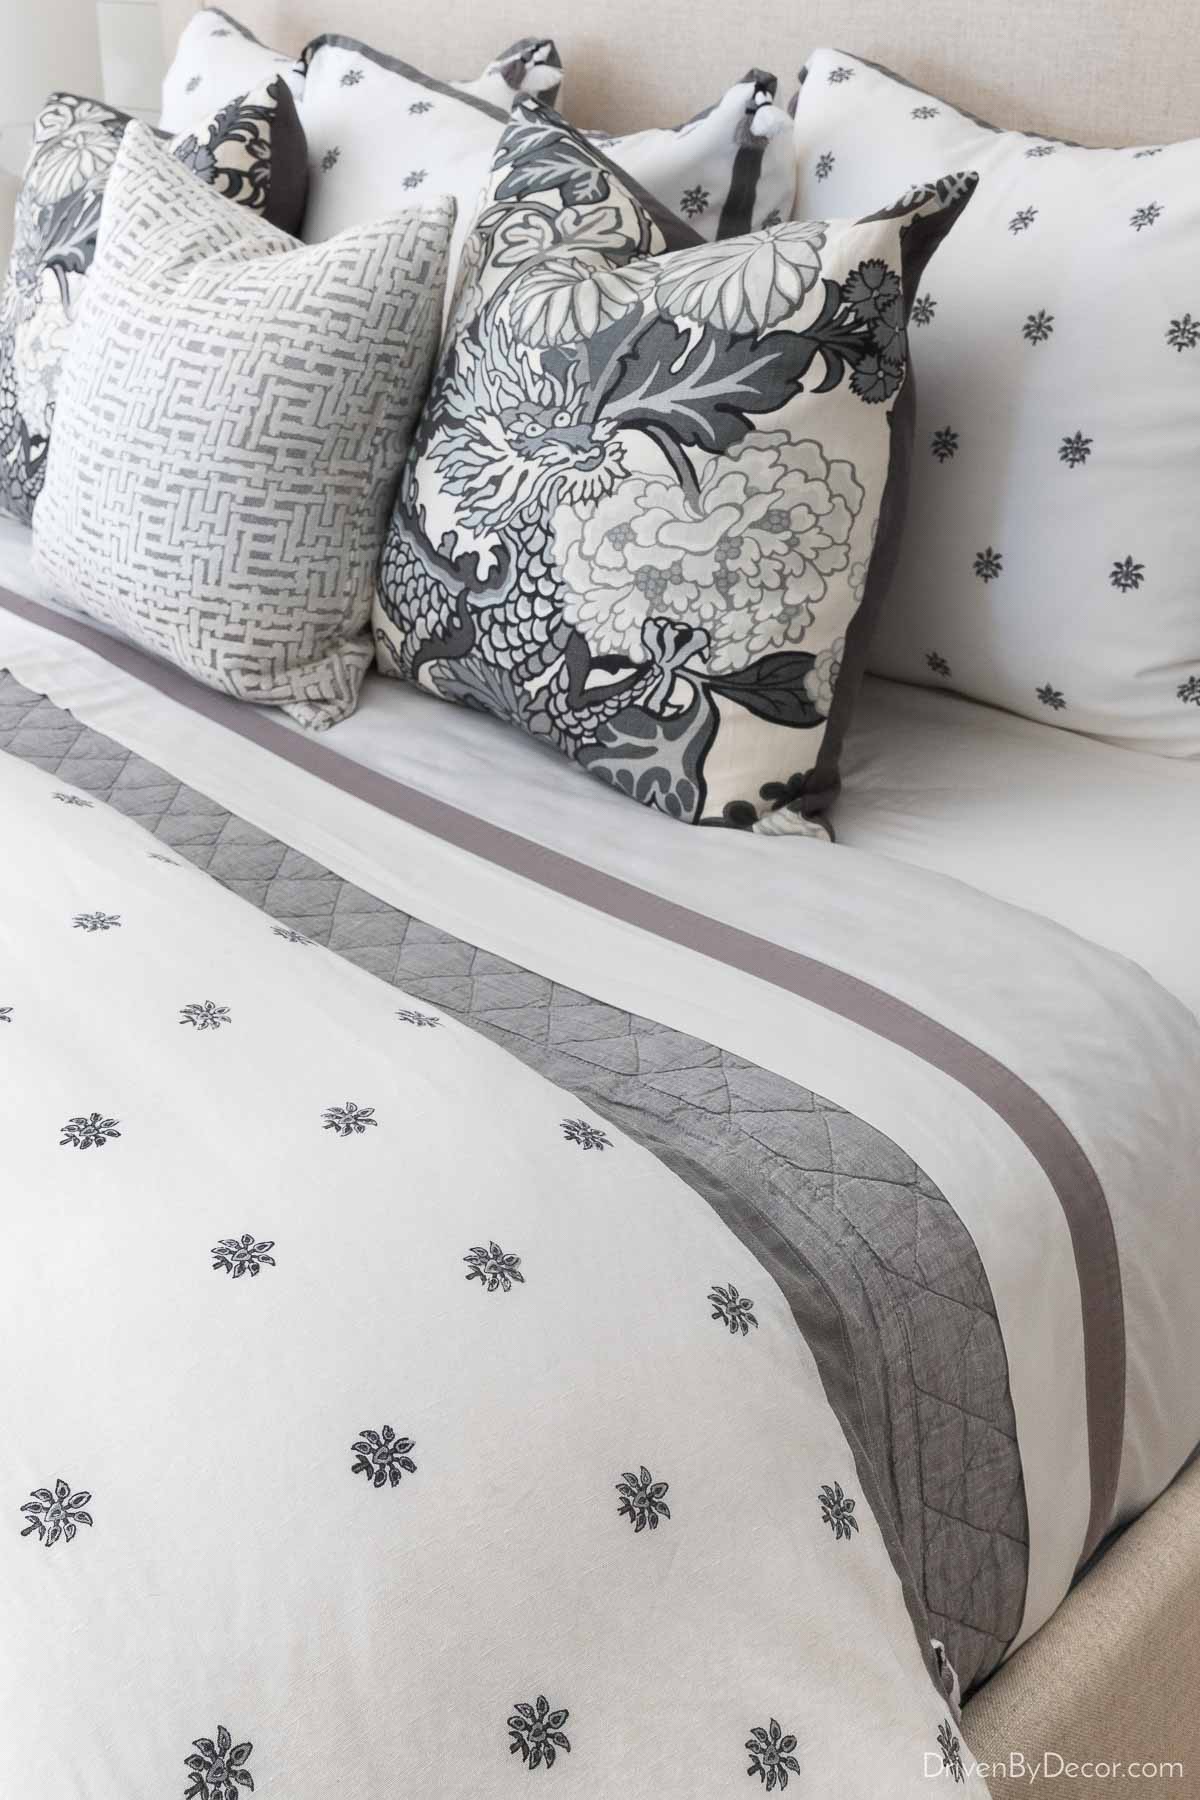 PINS pillow cases - AREA home bedding